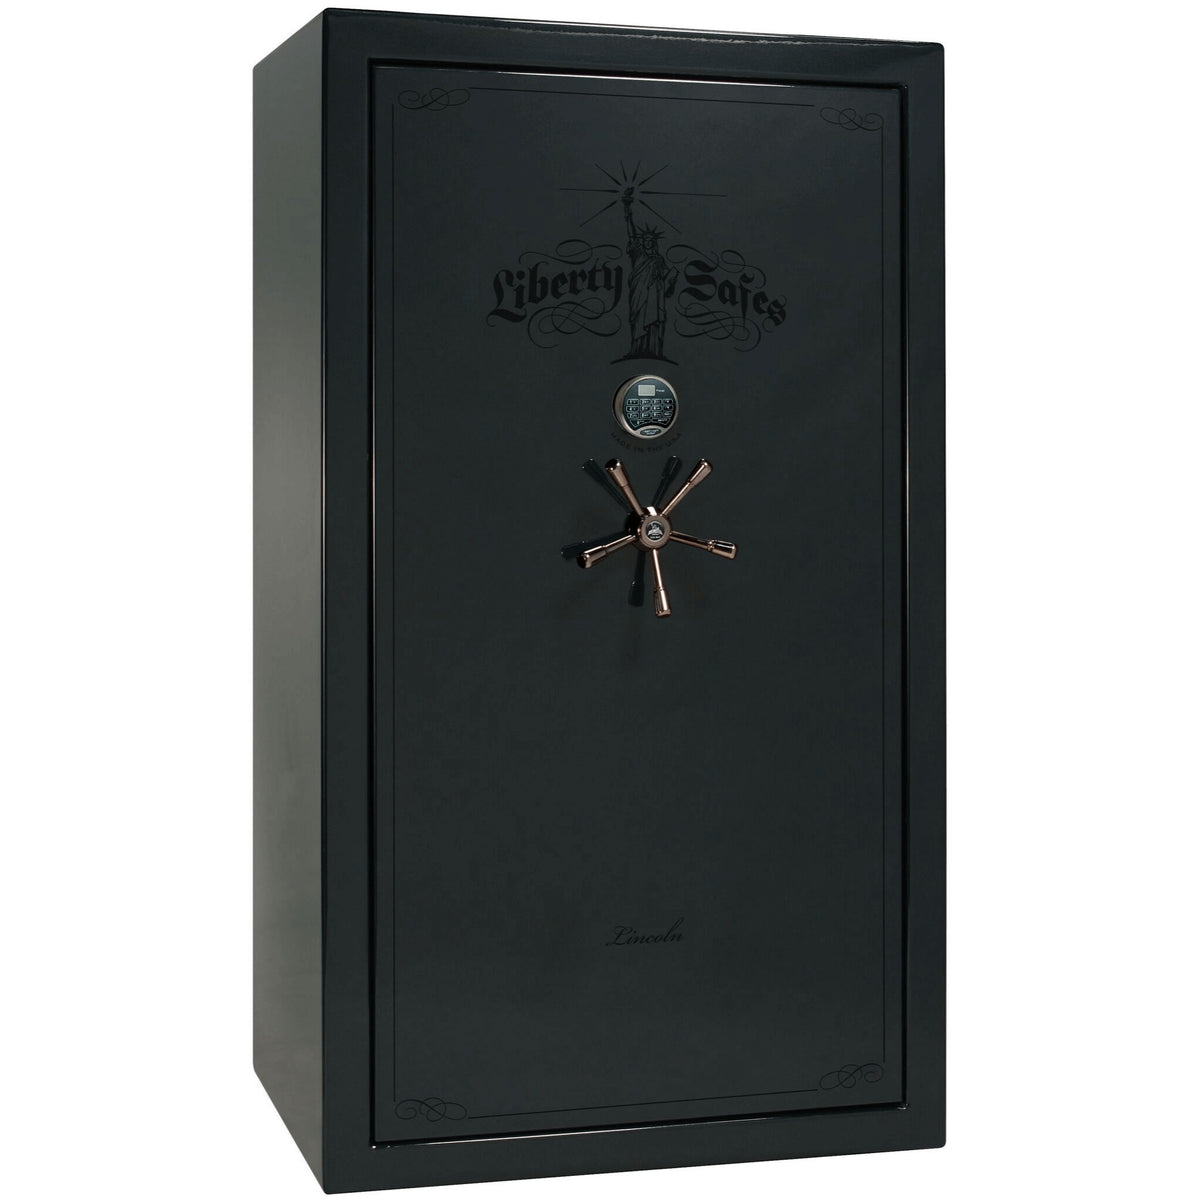 Liberty Lincoln 50 Safe in Green Gloss with Black Chrome Electronic Lock.